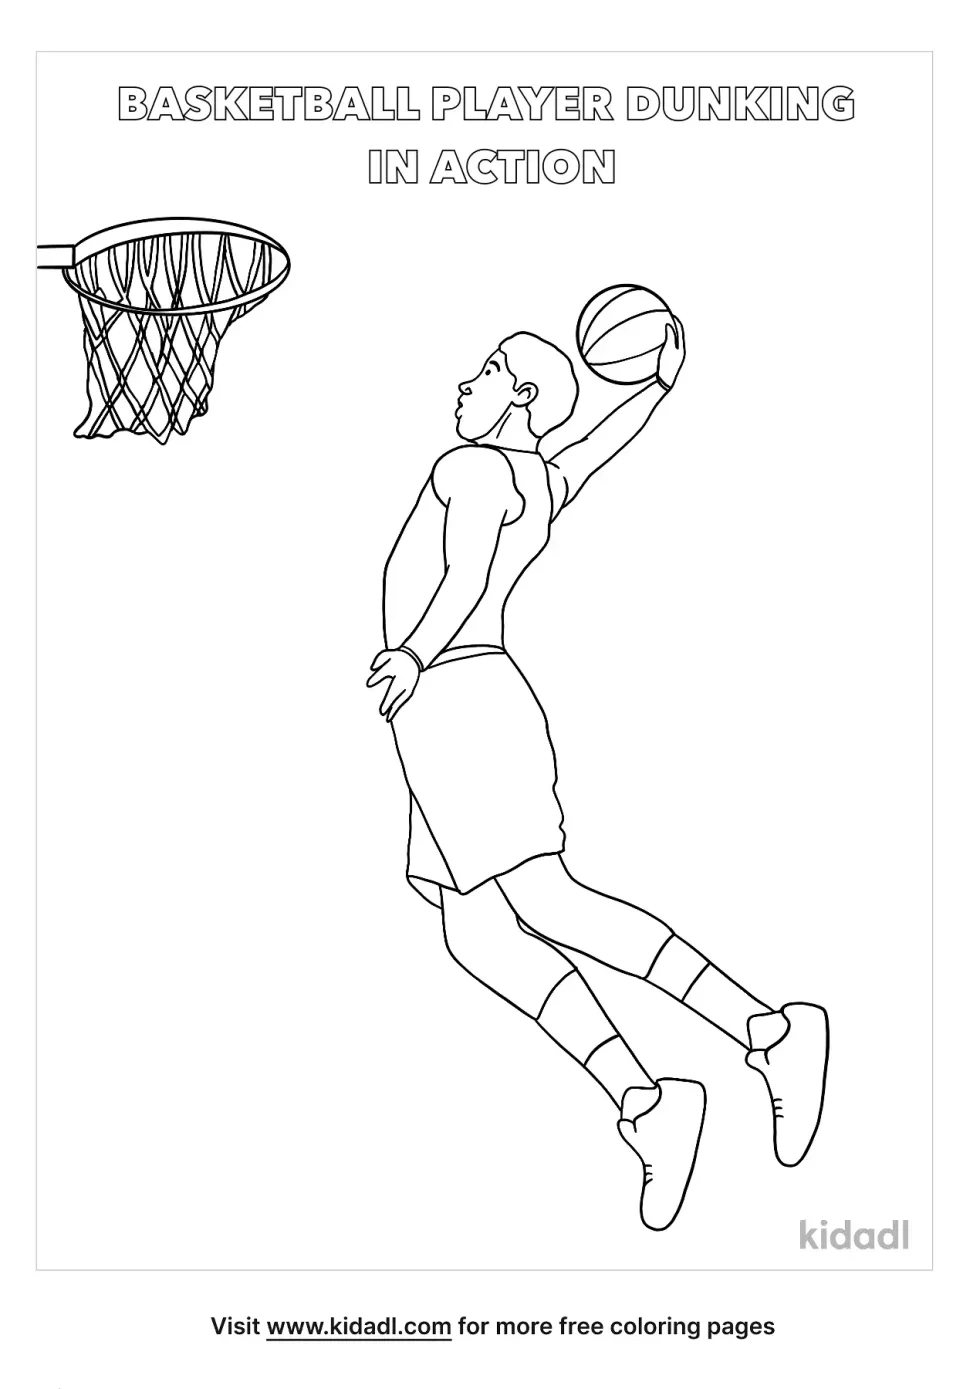 Basketball Player Dunking Coloring Page